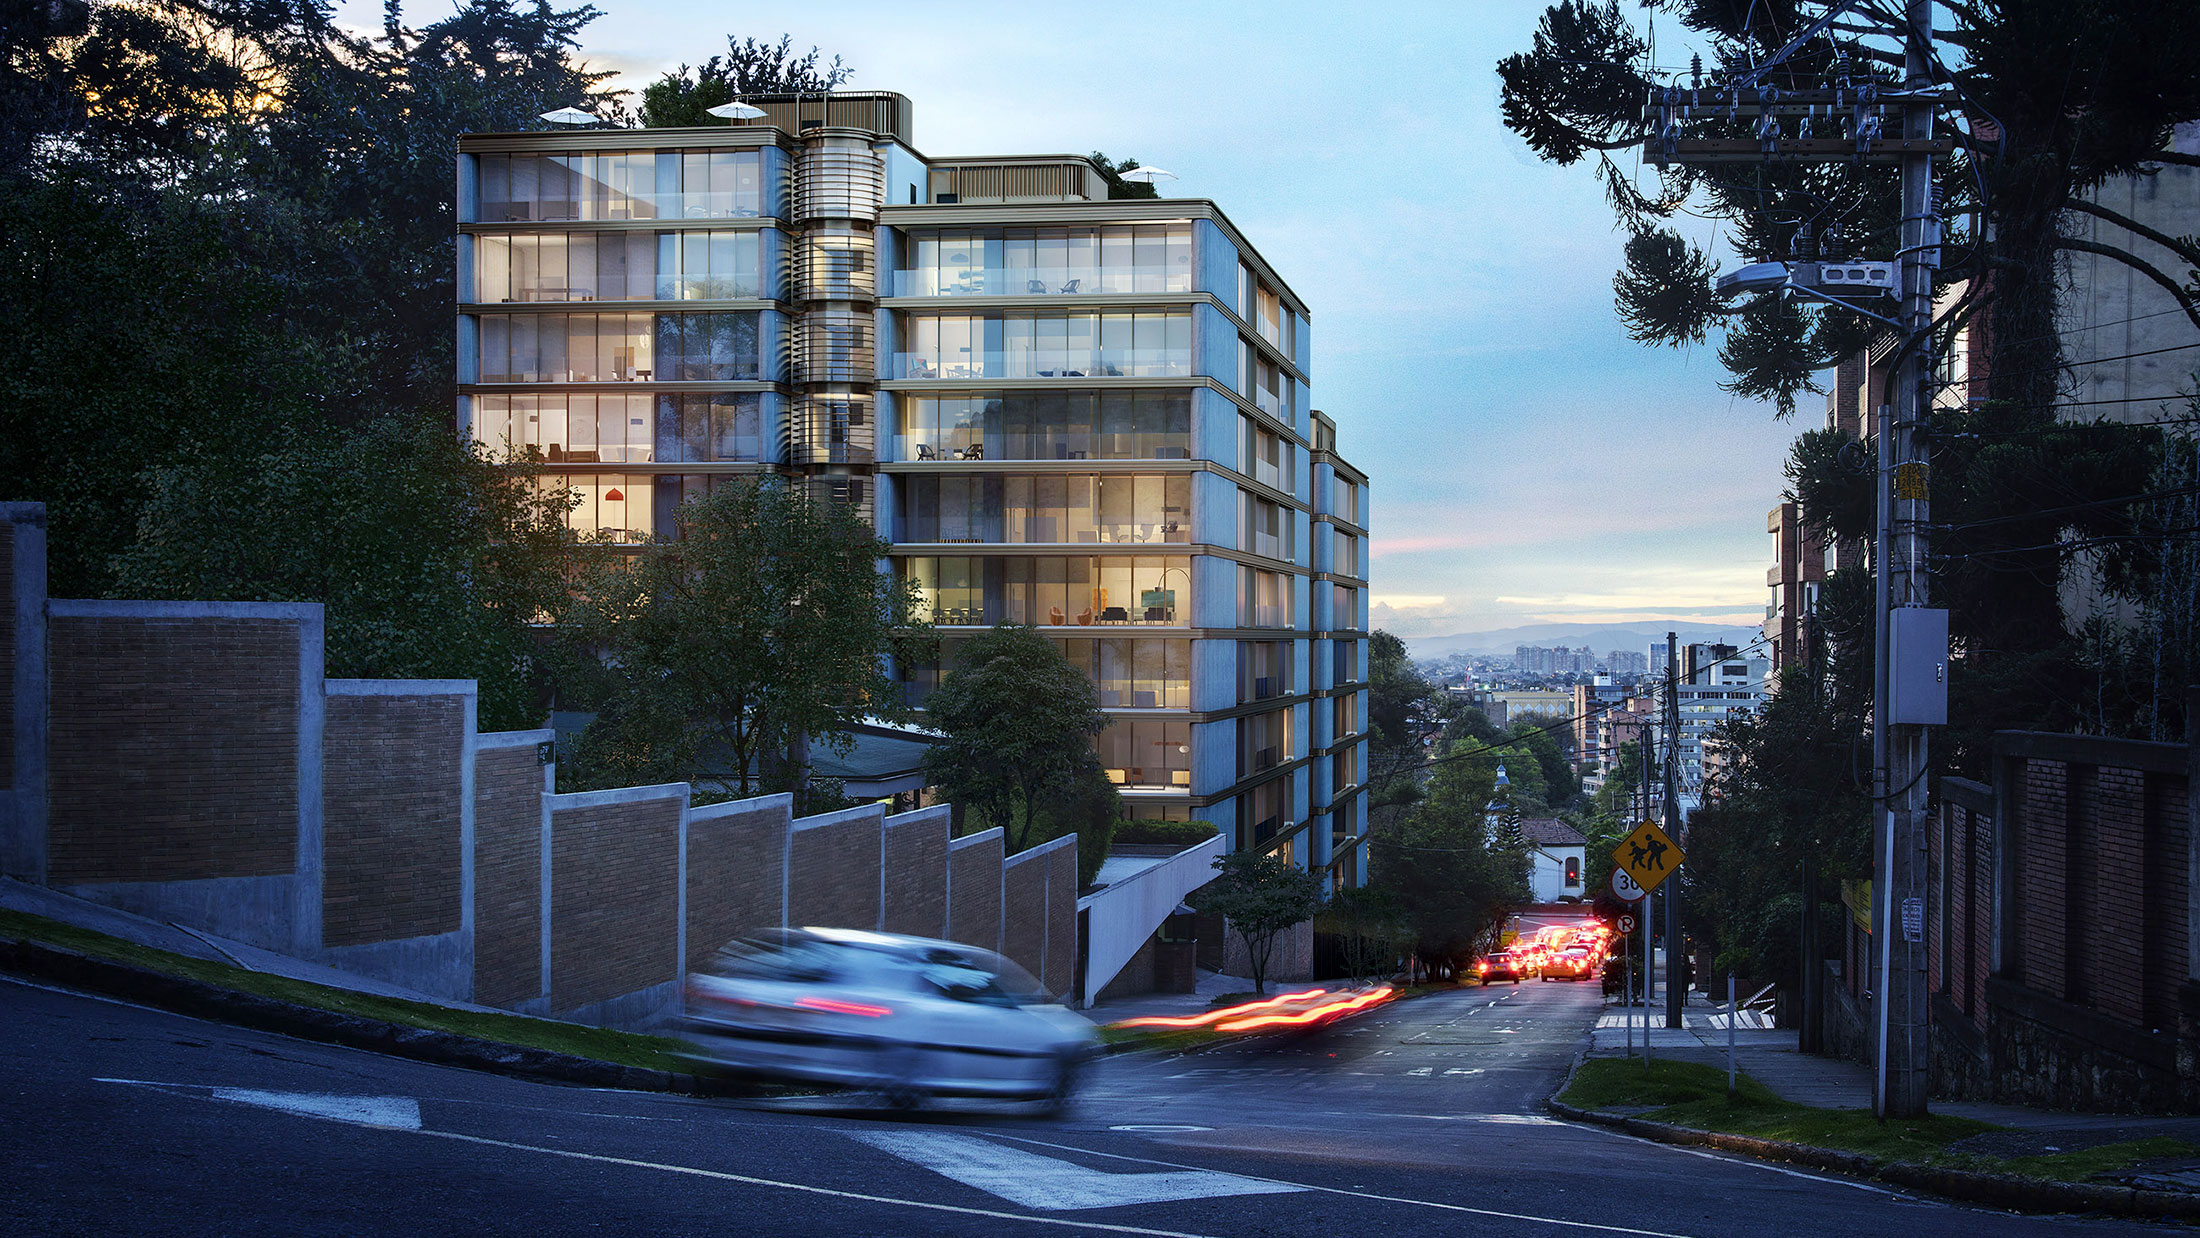 Architectural Rendering of the exterior of the Calle 79B project located in Bogotá, Colombia